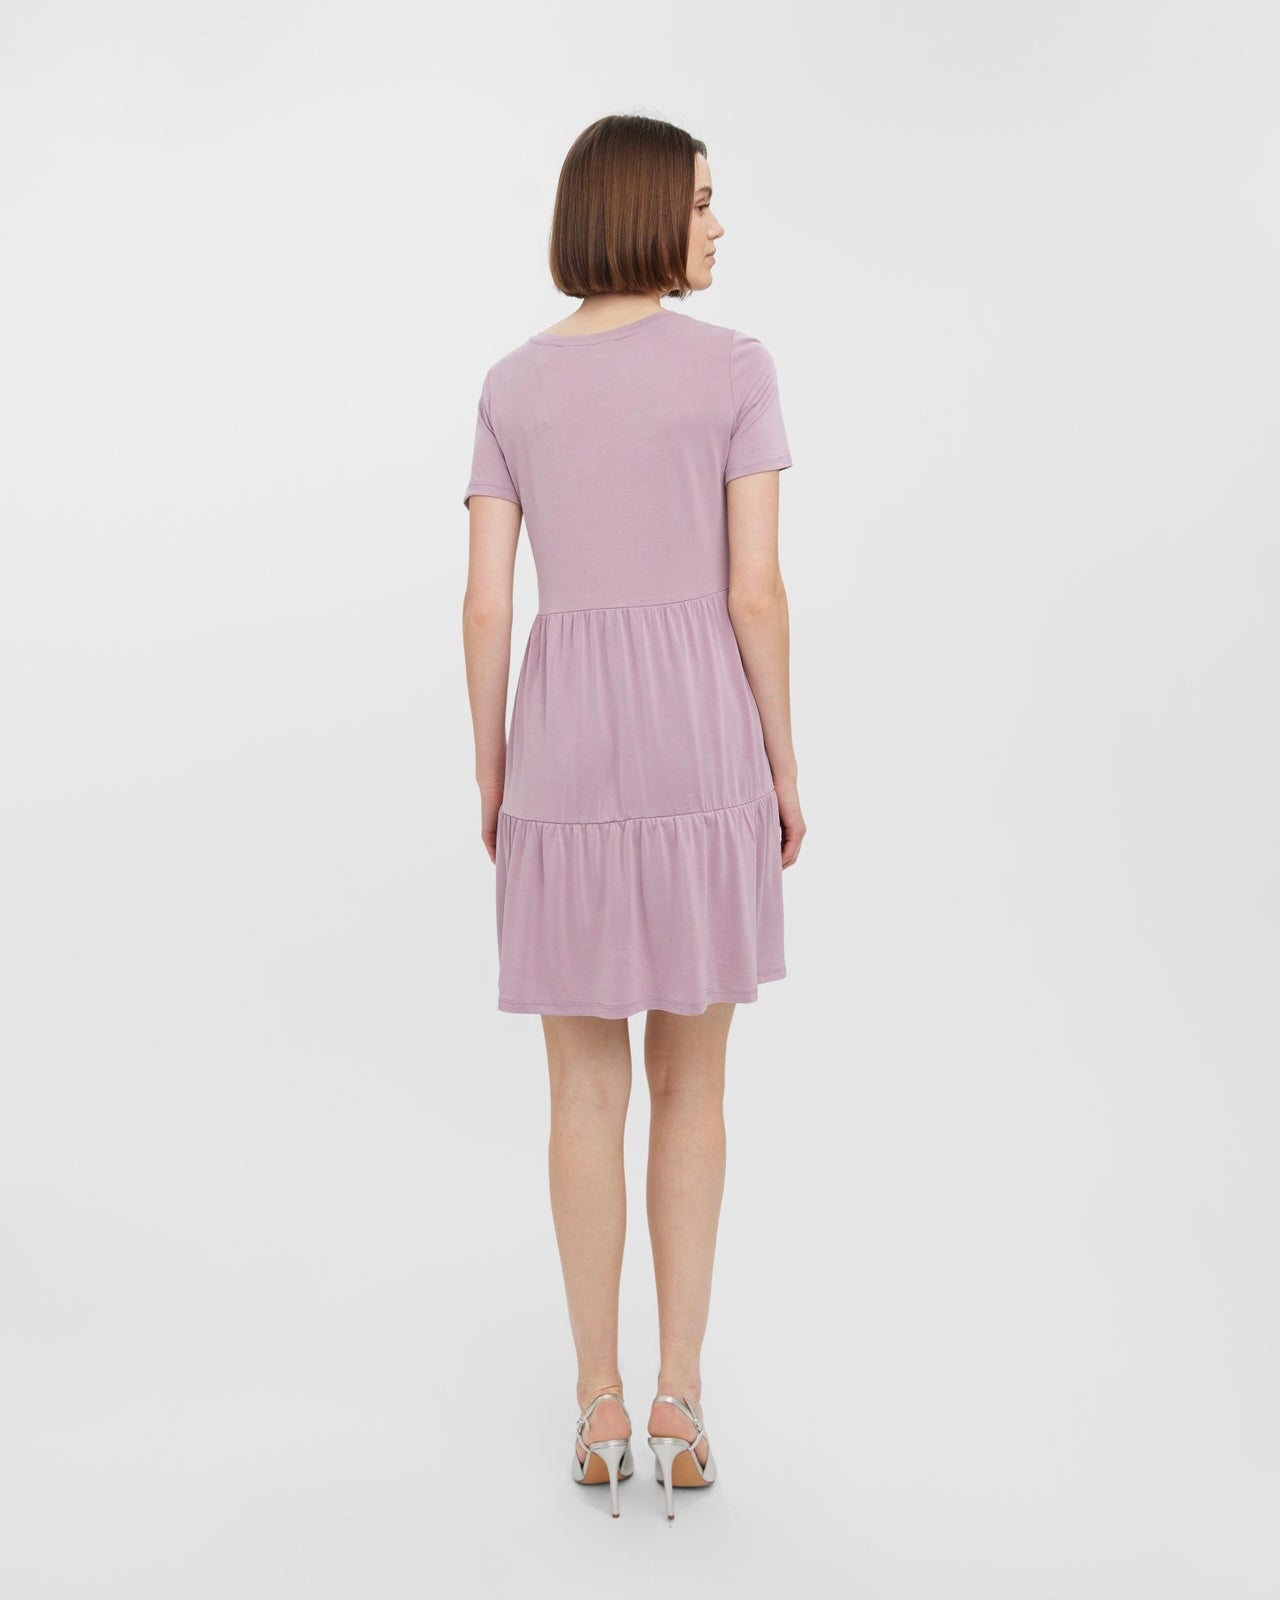 The Filli Calia Dress - 5 colors to choose from